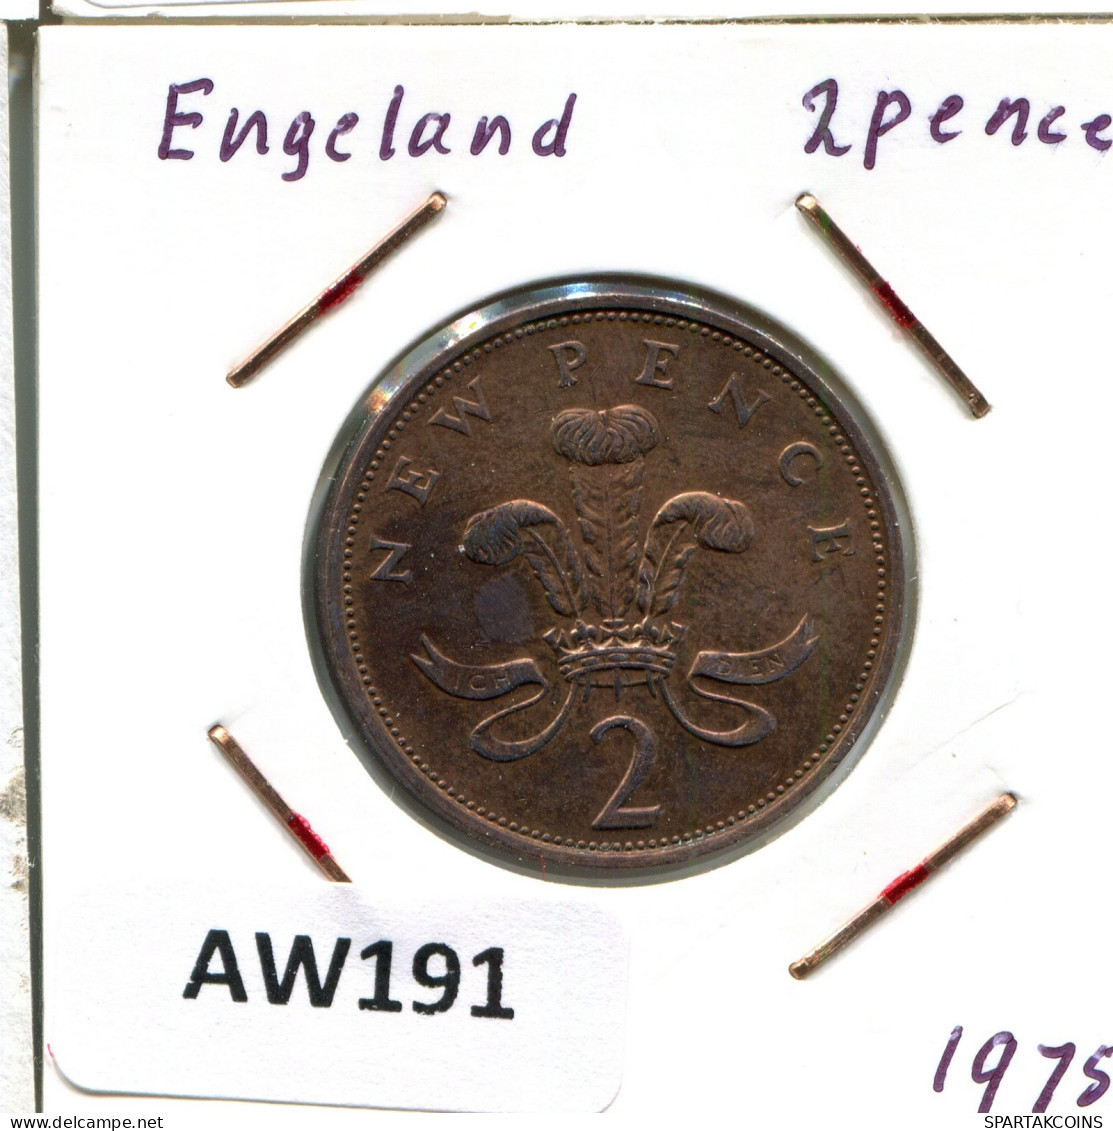 2 NEW PENCE 1975 UK GREAT BRITAIN Coin #AW191.U.A - 2 Pence & 2 New Pence